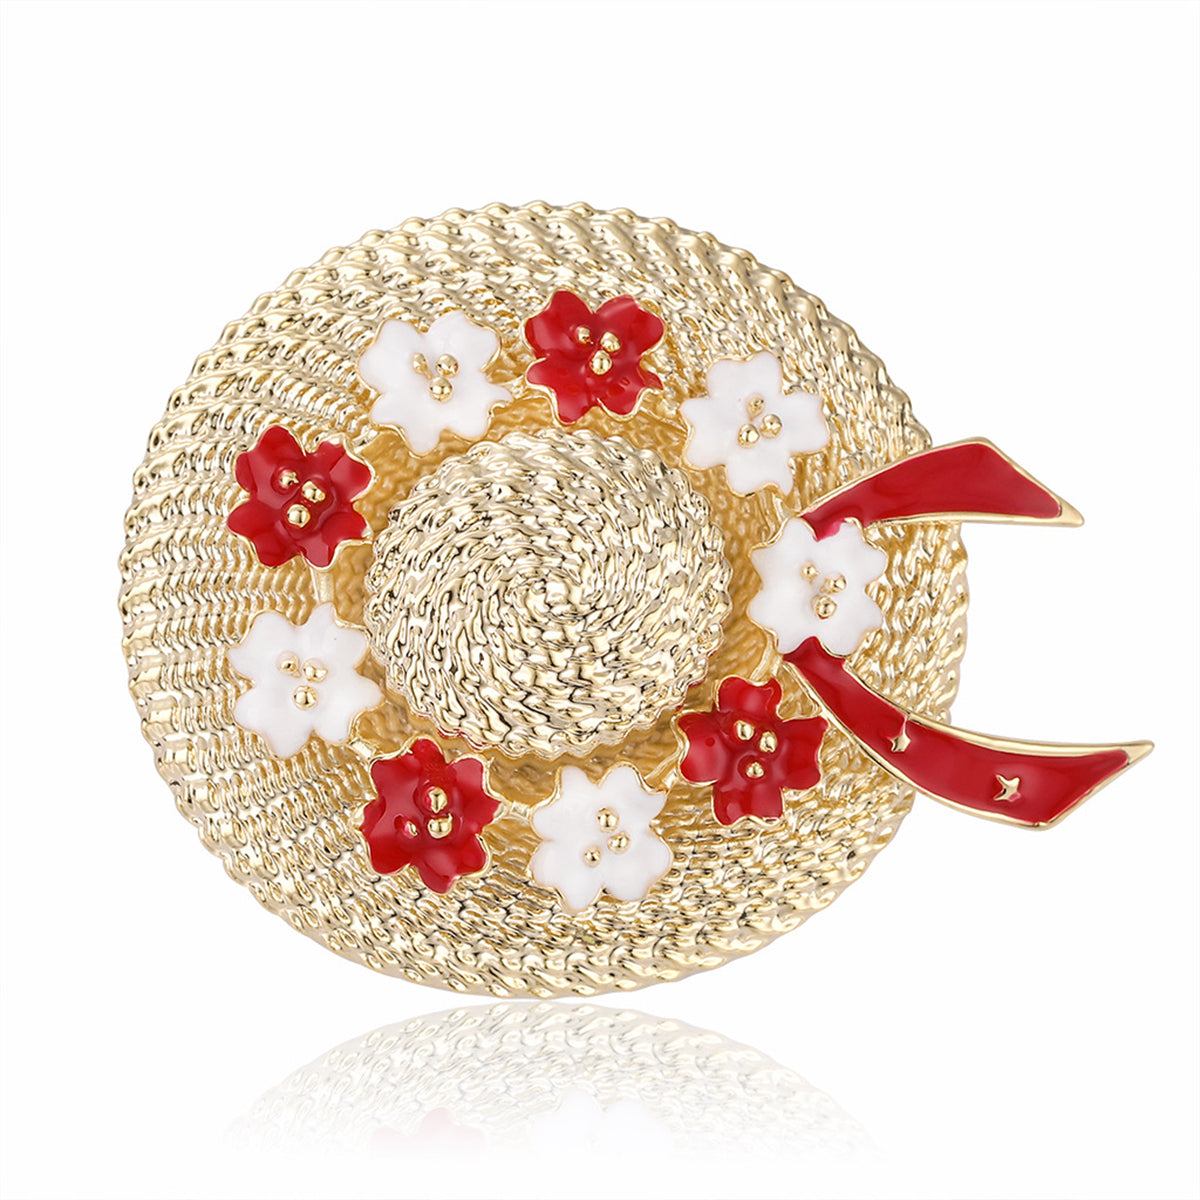 Red Enamel & 18K Gold-Plated Floral Sunhat Brooch